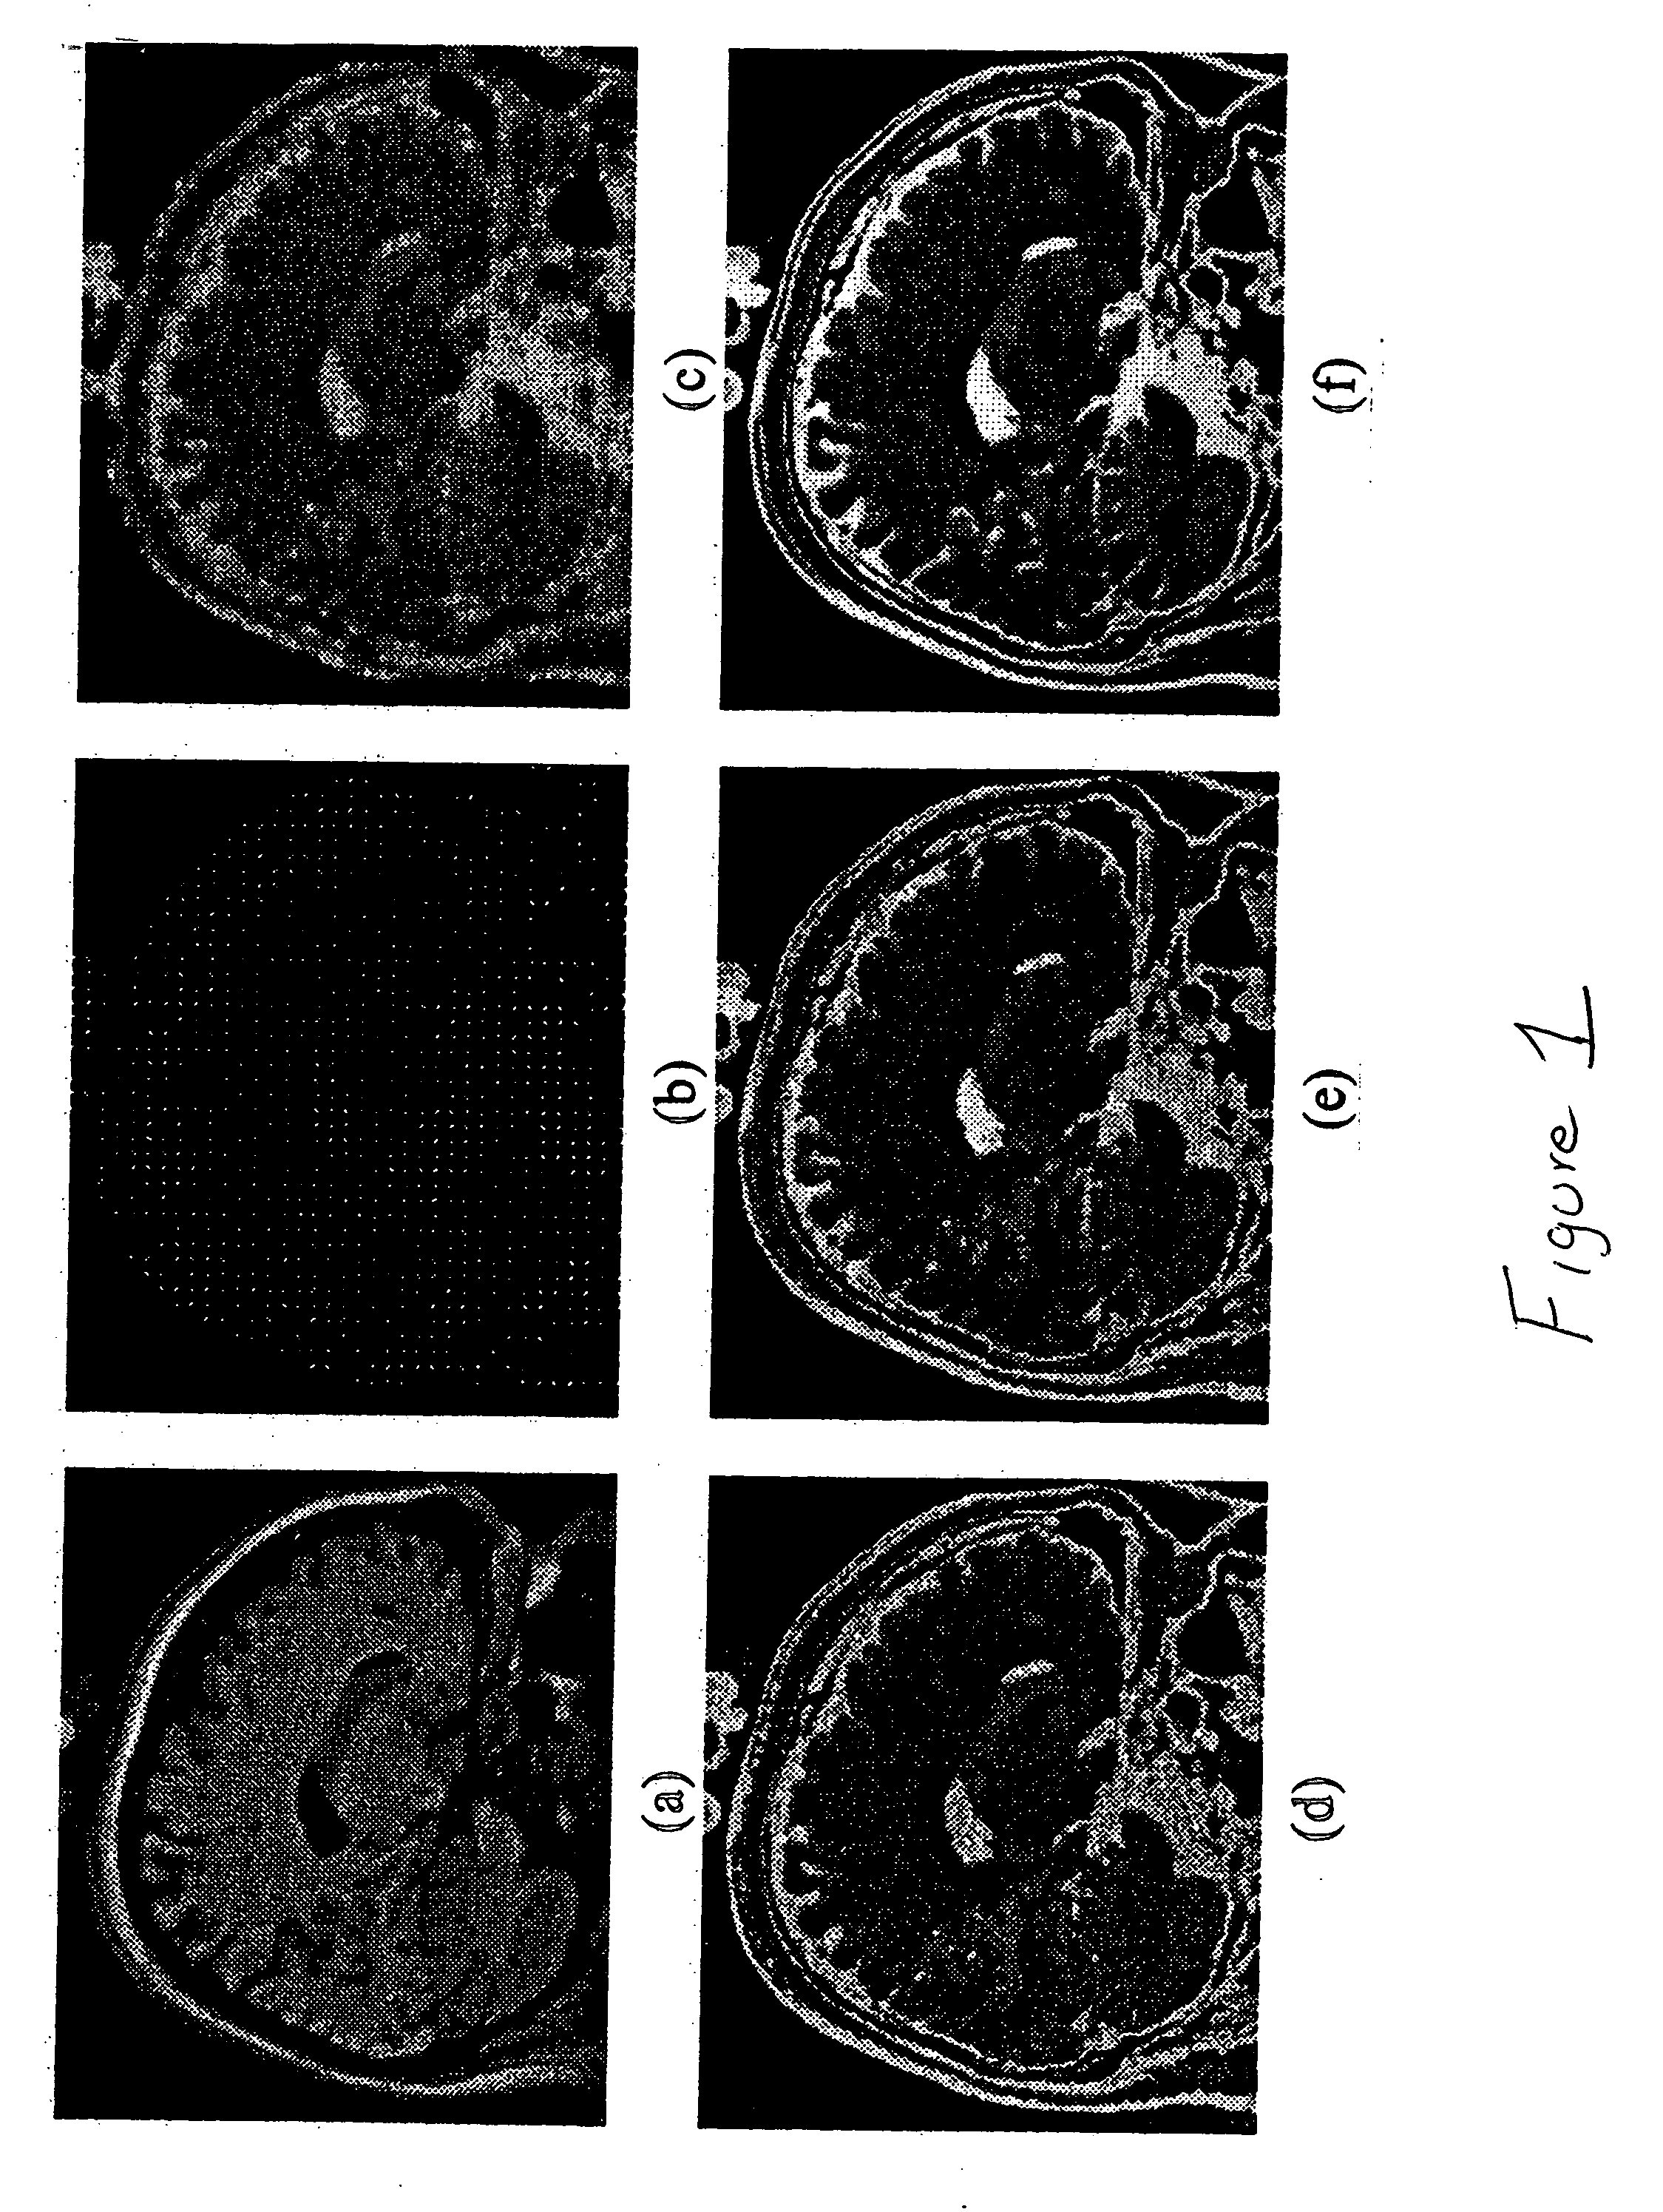 Method and apparatus for propagating high resolution detail between multimodal data sets